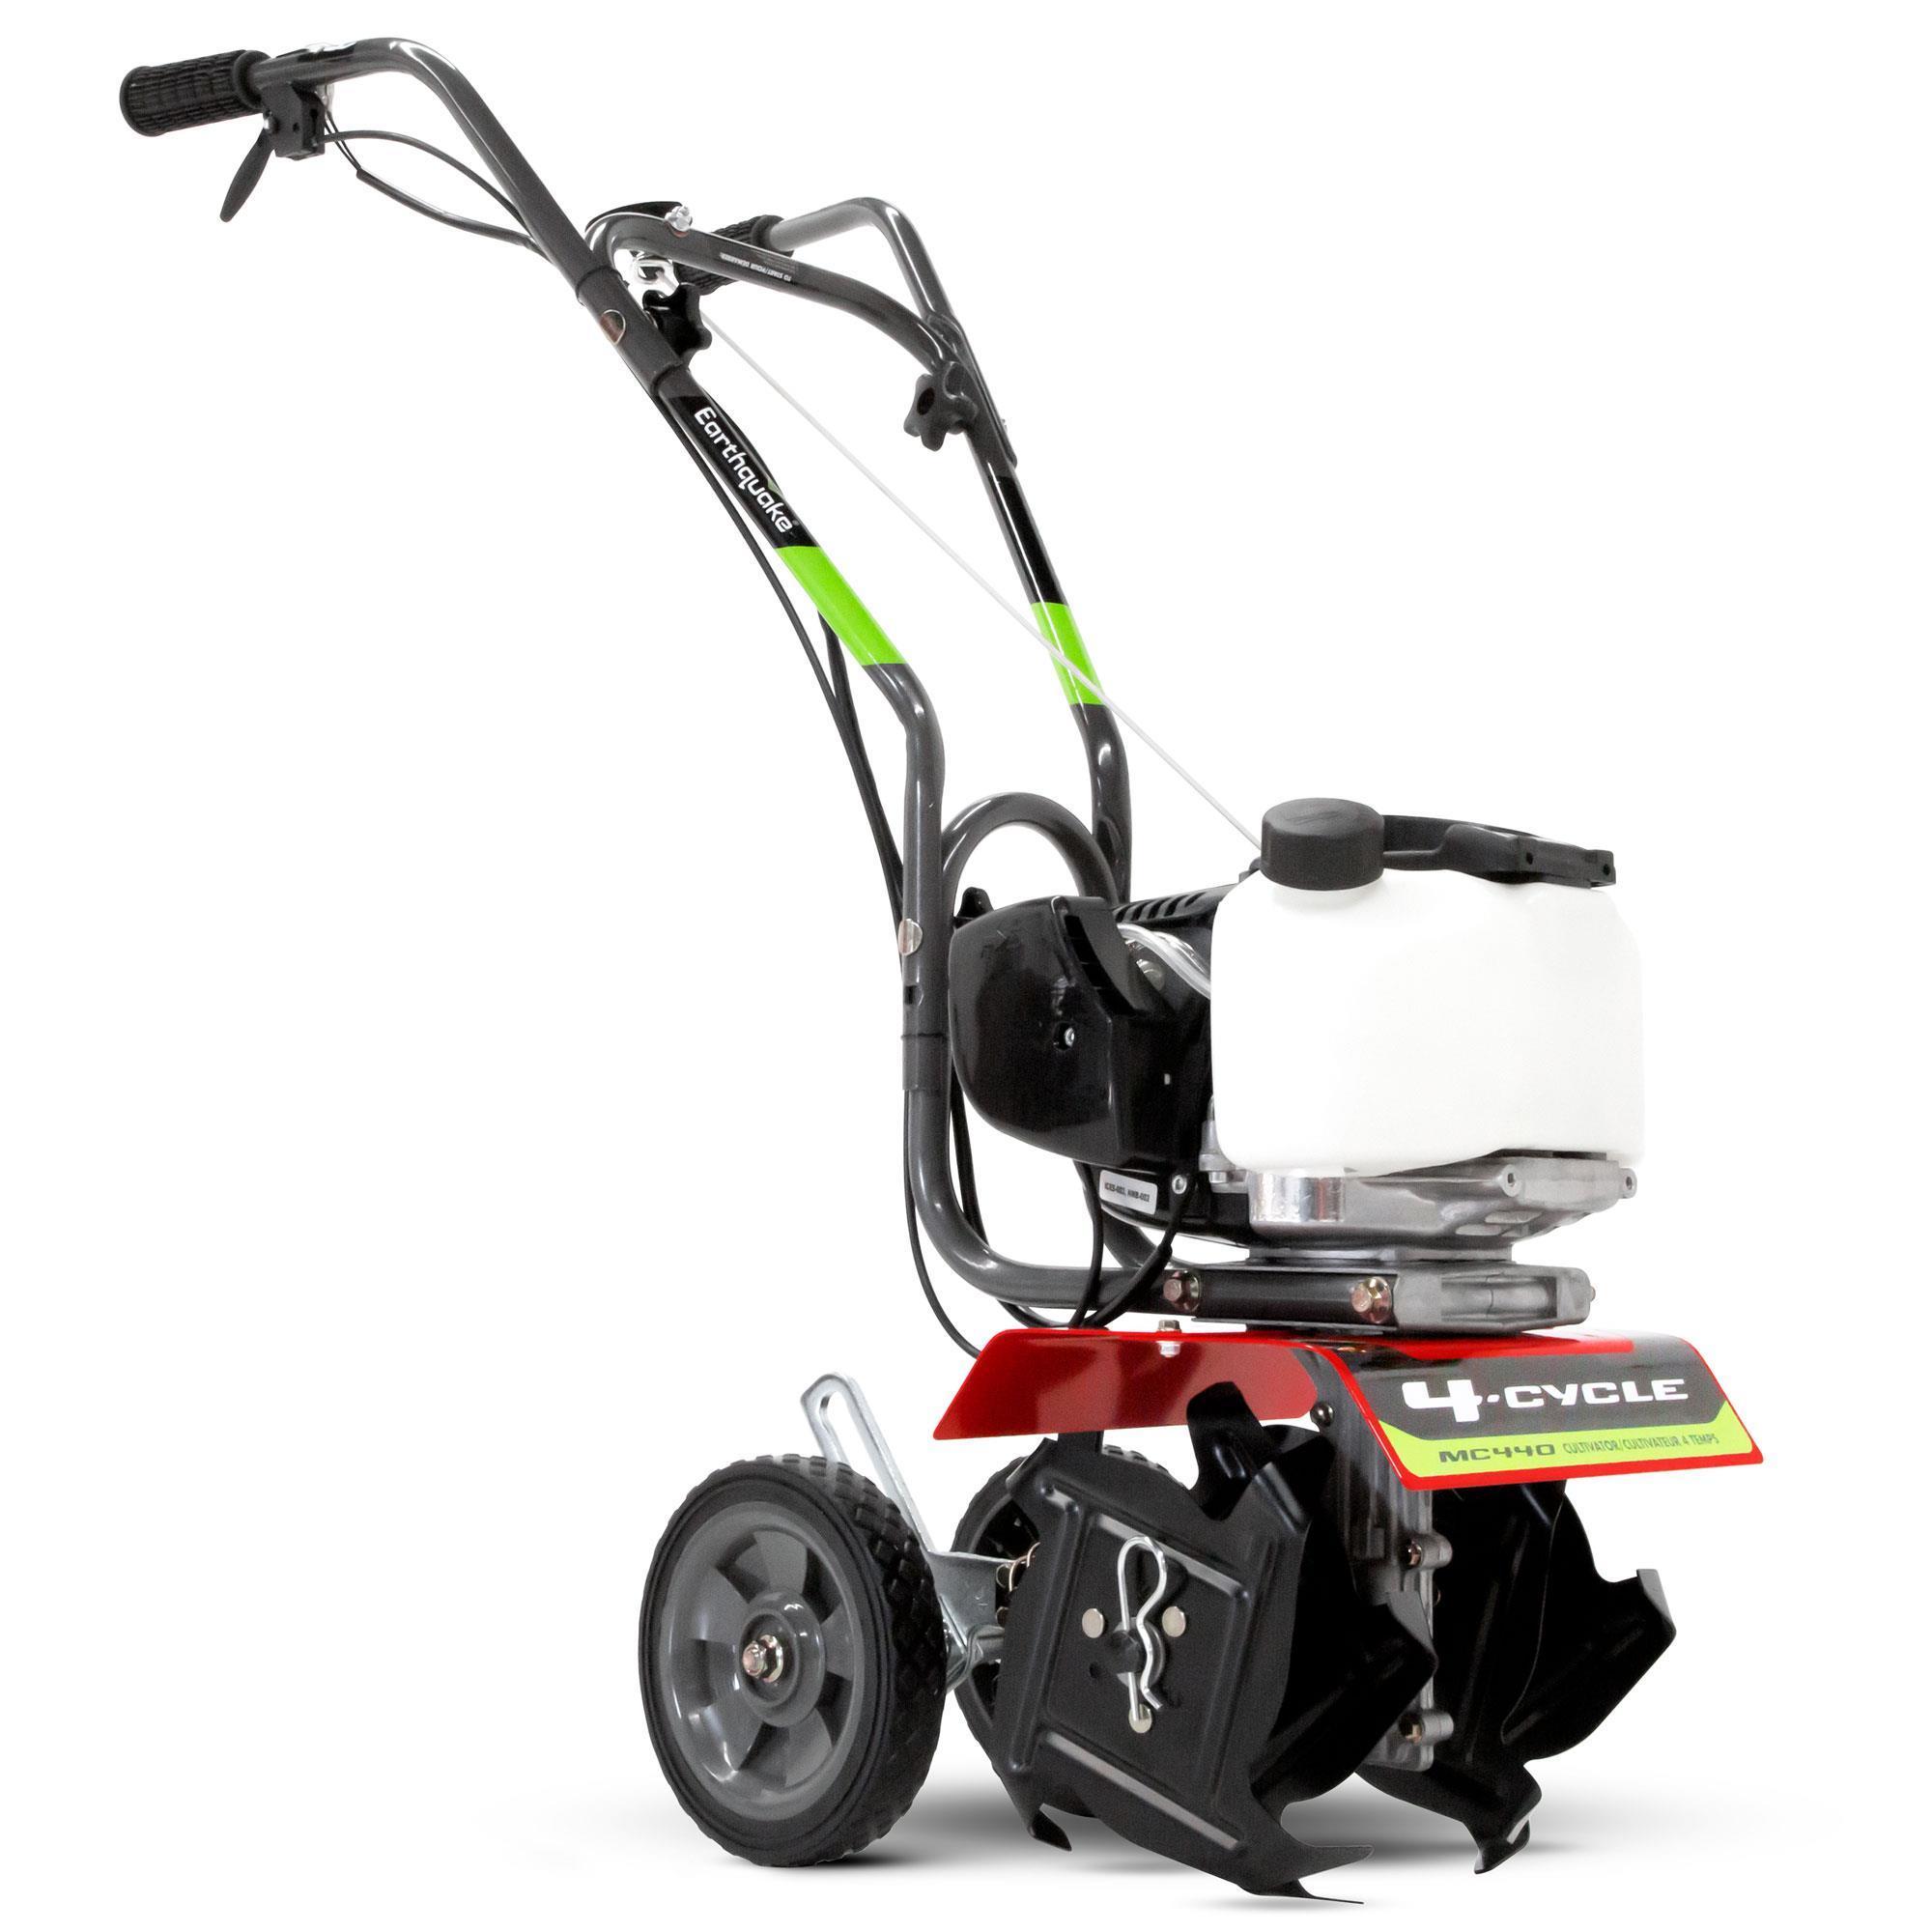 Earthquake, MC440 Mini Cultivator, 40cc 4-Cycle Viper Engine, Max. Working Width 10 in, Engine Displacement 40 cc, Model 12802